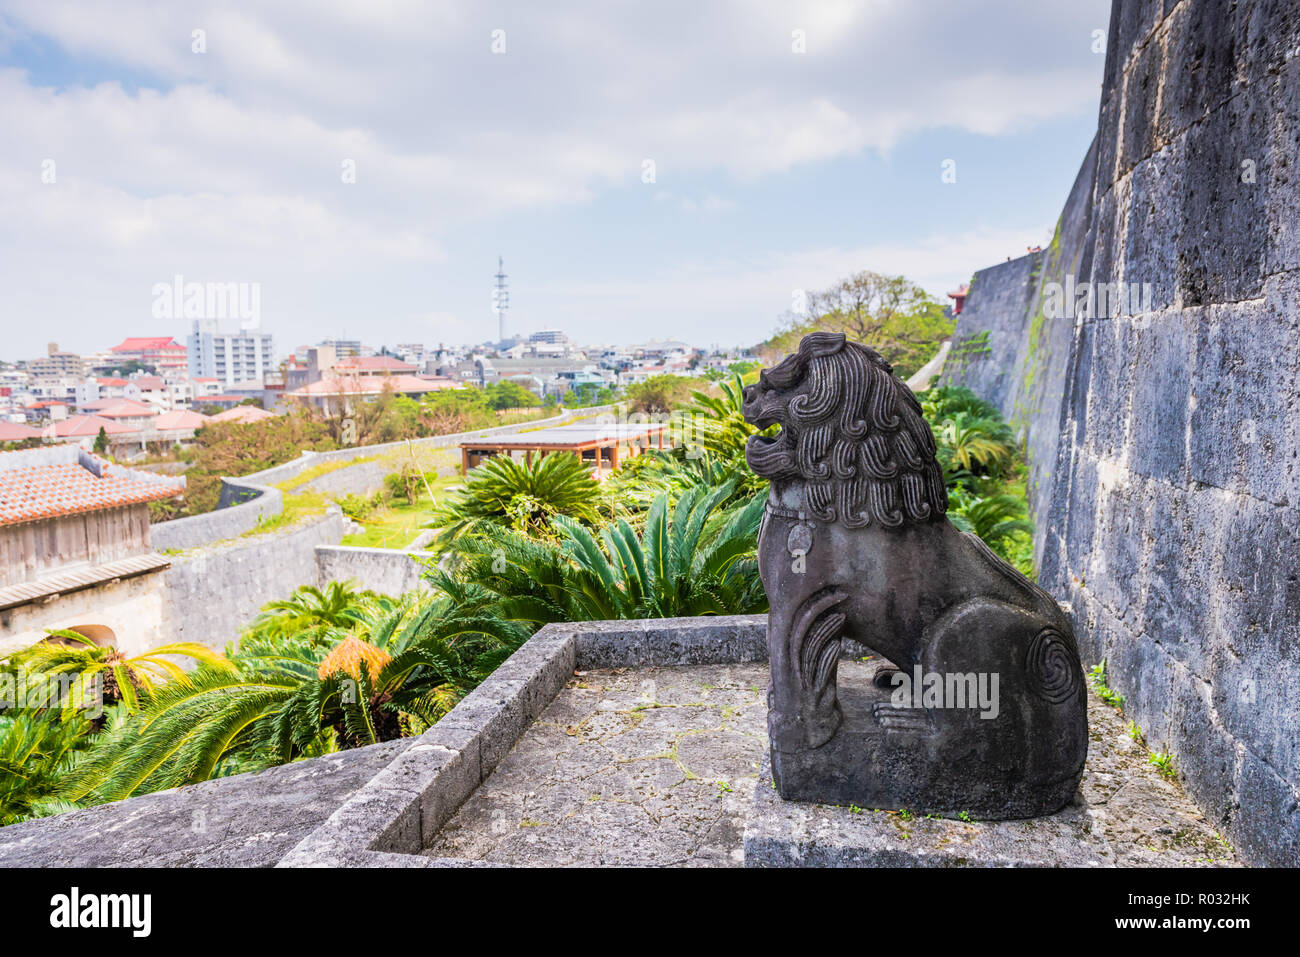 Okinawa / Japan - October 9, 2018: Shurijo Castle served as the proud and dignified center of Ryukyu Kingdom and its politics, foreign affairs and cul Stock Photo